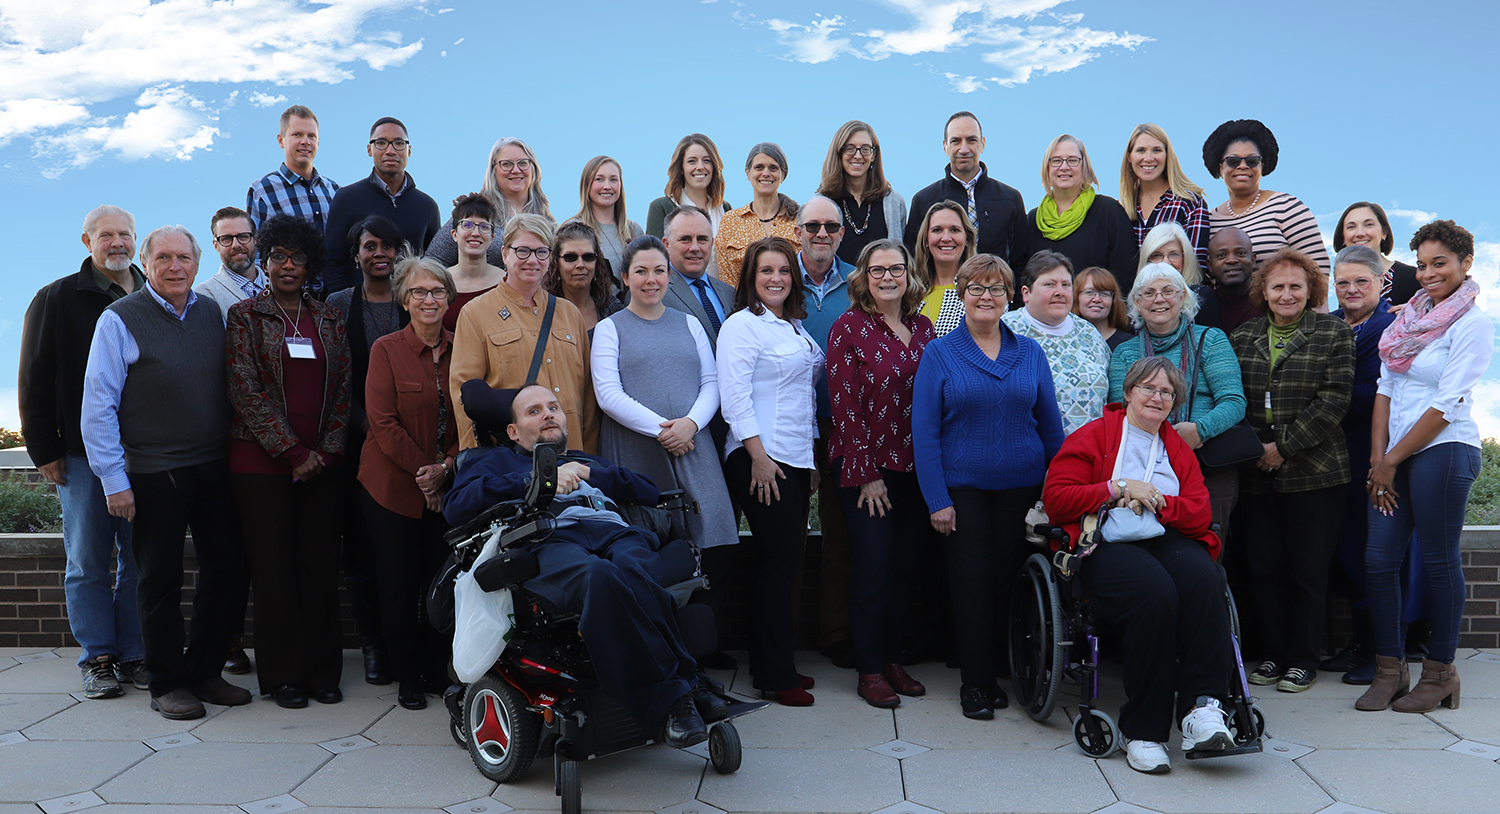 Group photo of the staff members of UMKC IHD and Advisory Leadership Team members who participated in an all organization meeting in Fall 2018